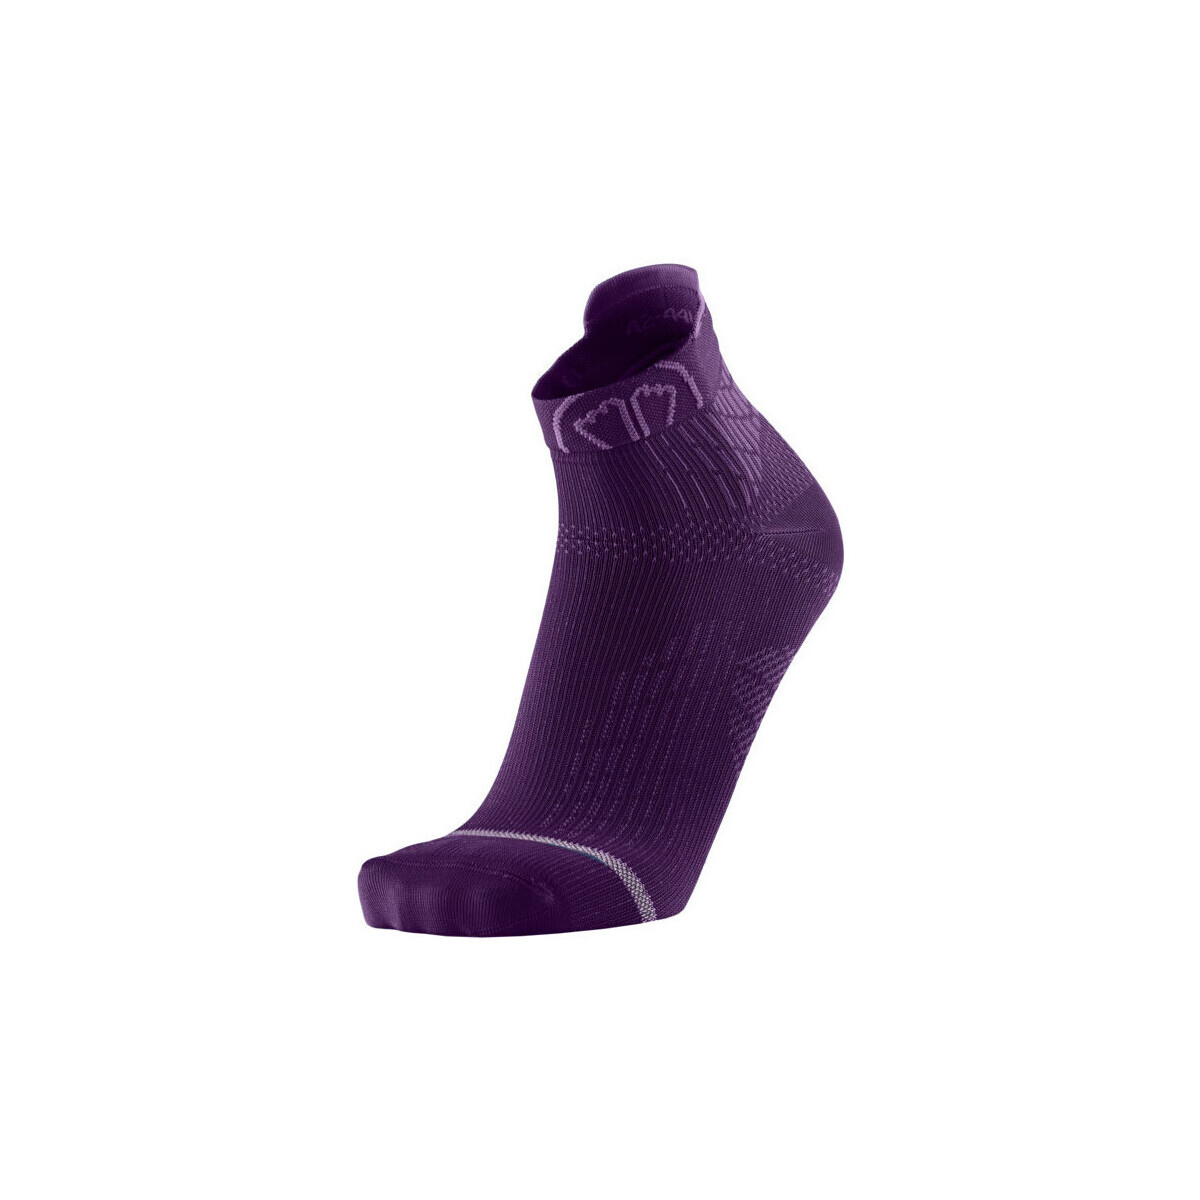 Sidas Violet Chaussettes Run Anatomic Ankle Lady RBrx57lO